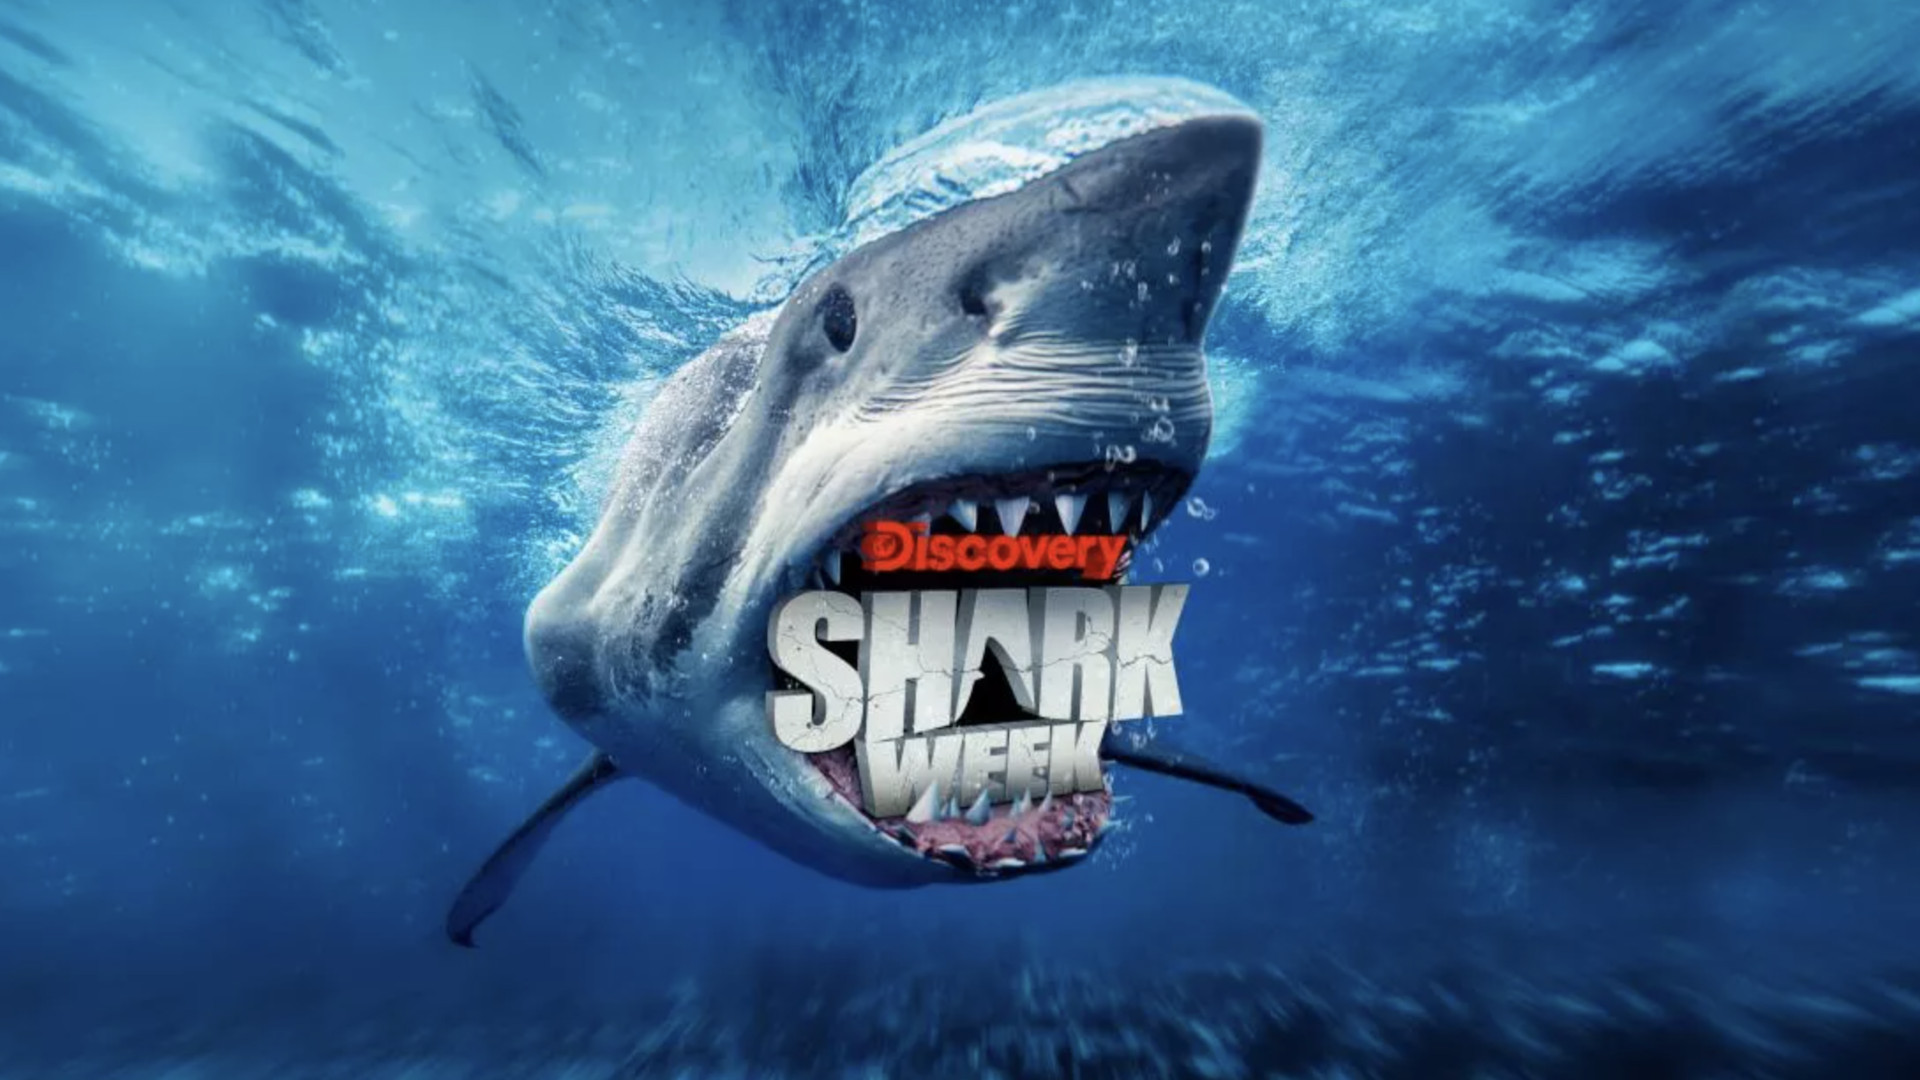 Watch When Sharks Attack and Why Streaming Online